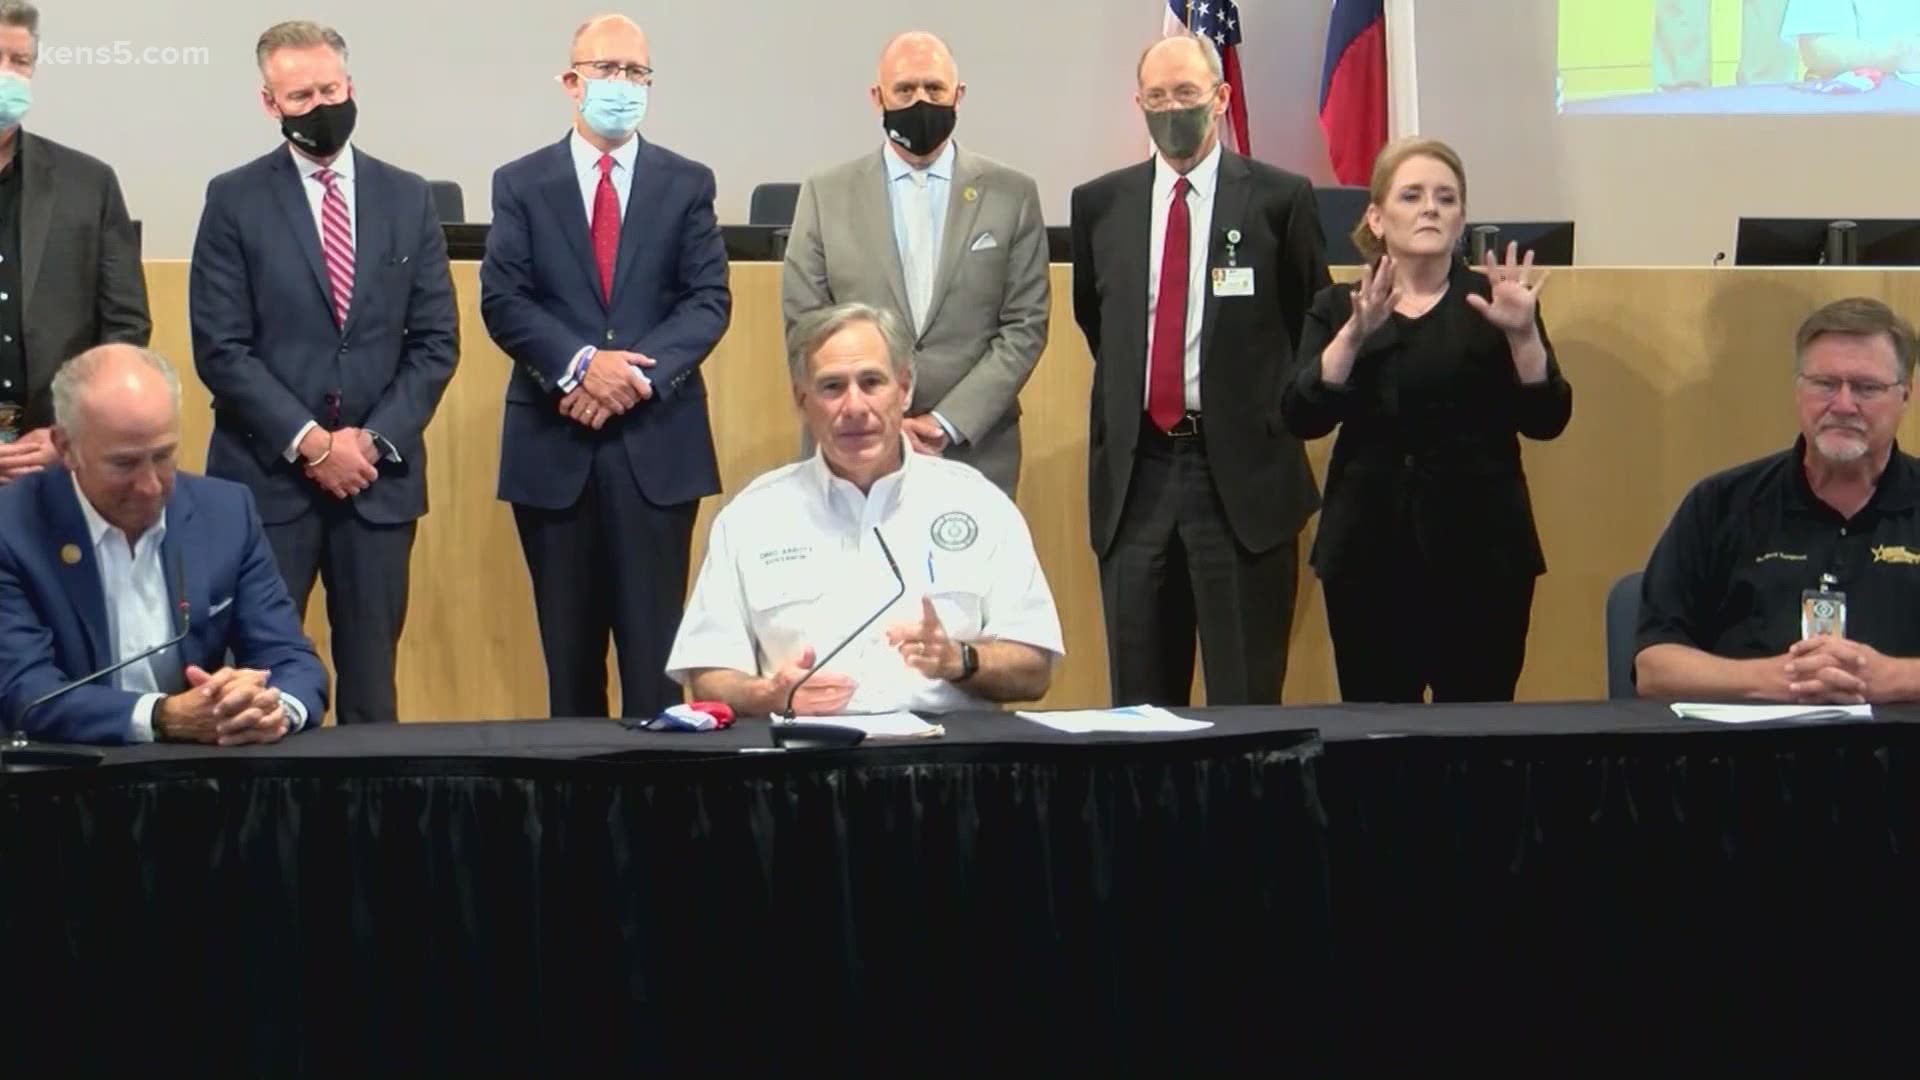 Several months into the pandemic, Abbott warned that there could be an accelerated spread of the coronavirus if Texans stop complying with safety measures.